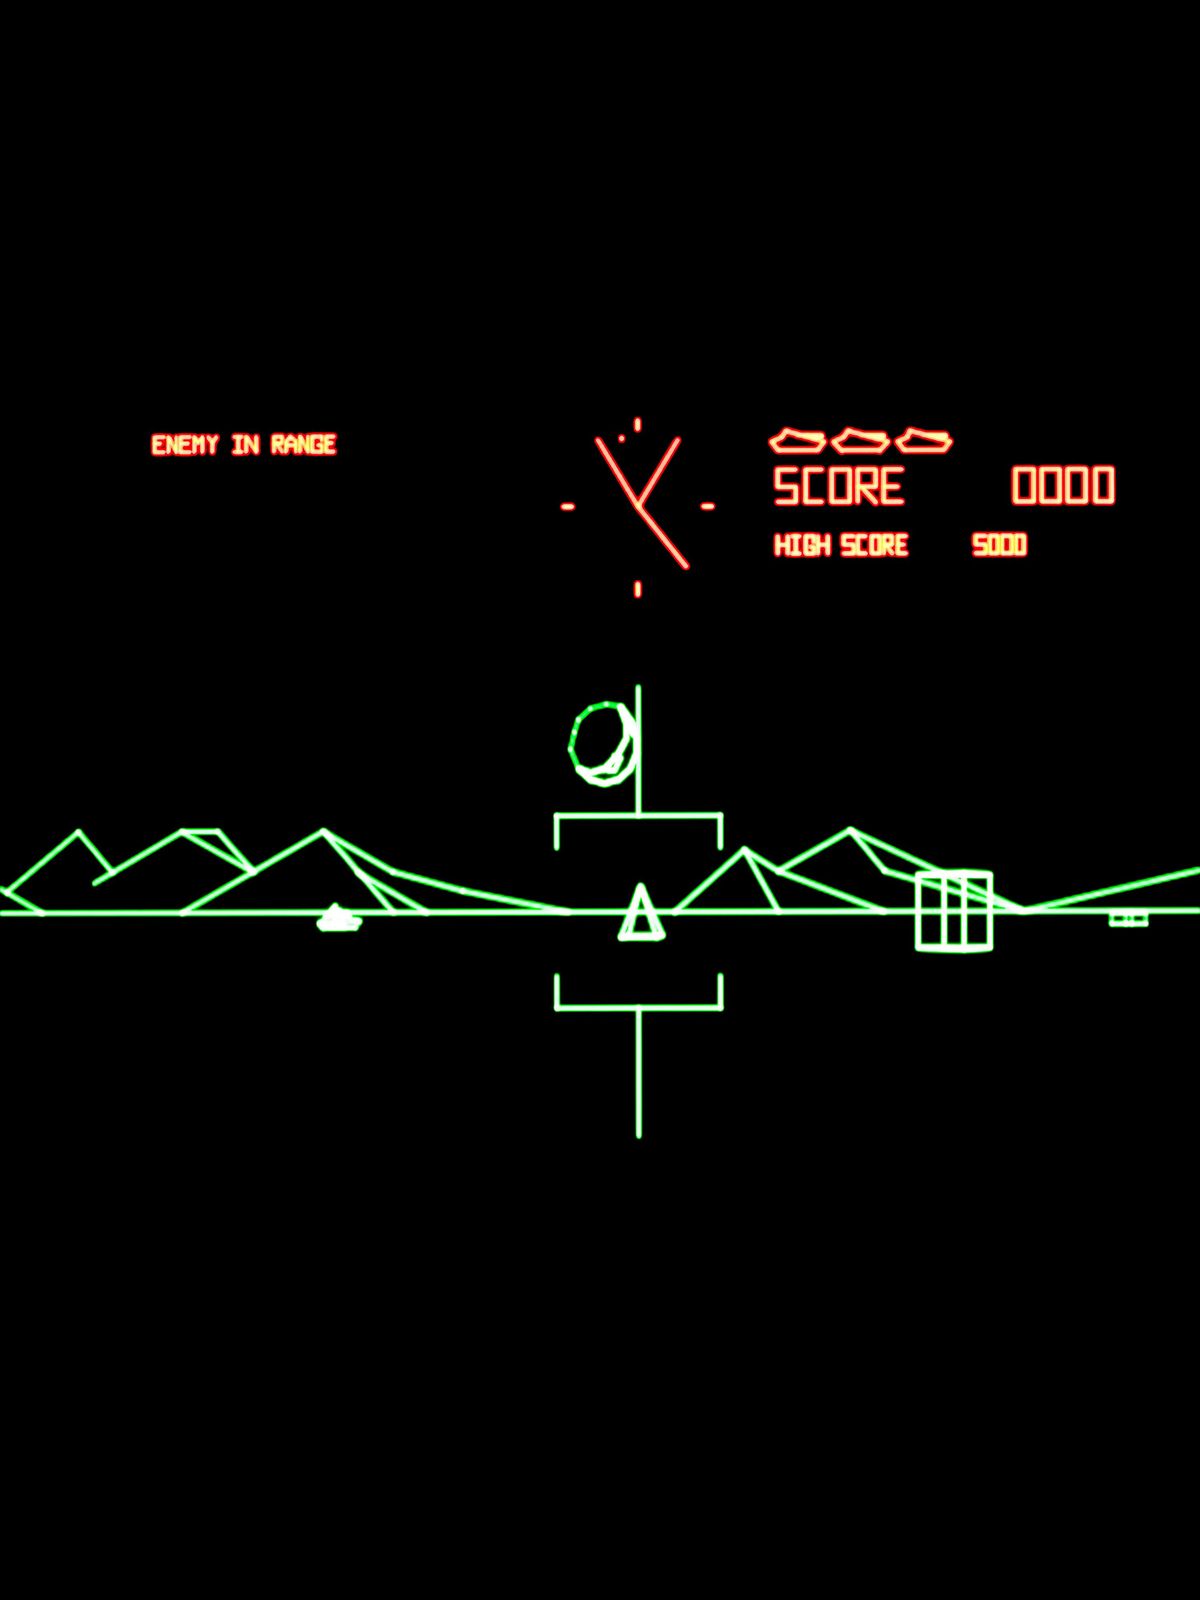 Battlezone Atari 1980 arcade videogame screenshot showing score field at top in orange and line drawing of mountains  and gun scope in green